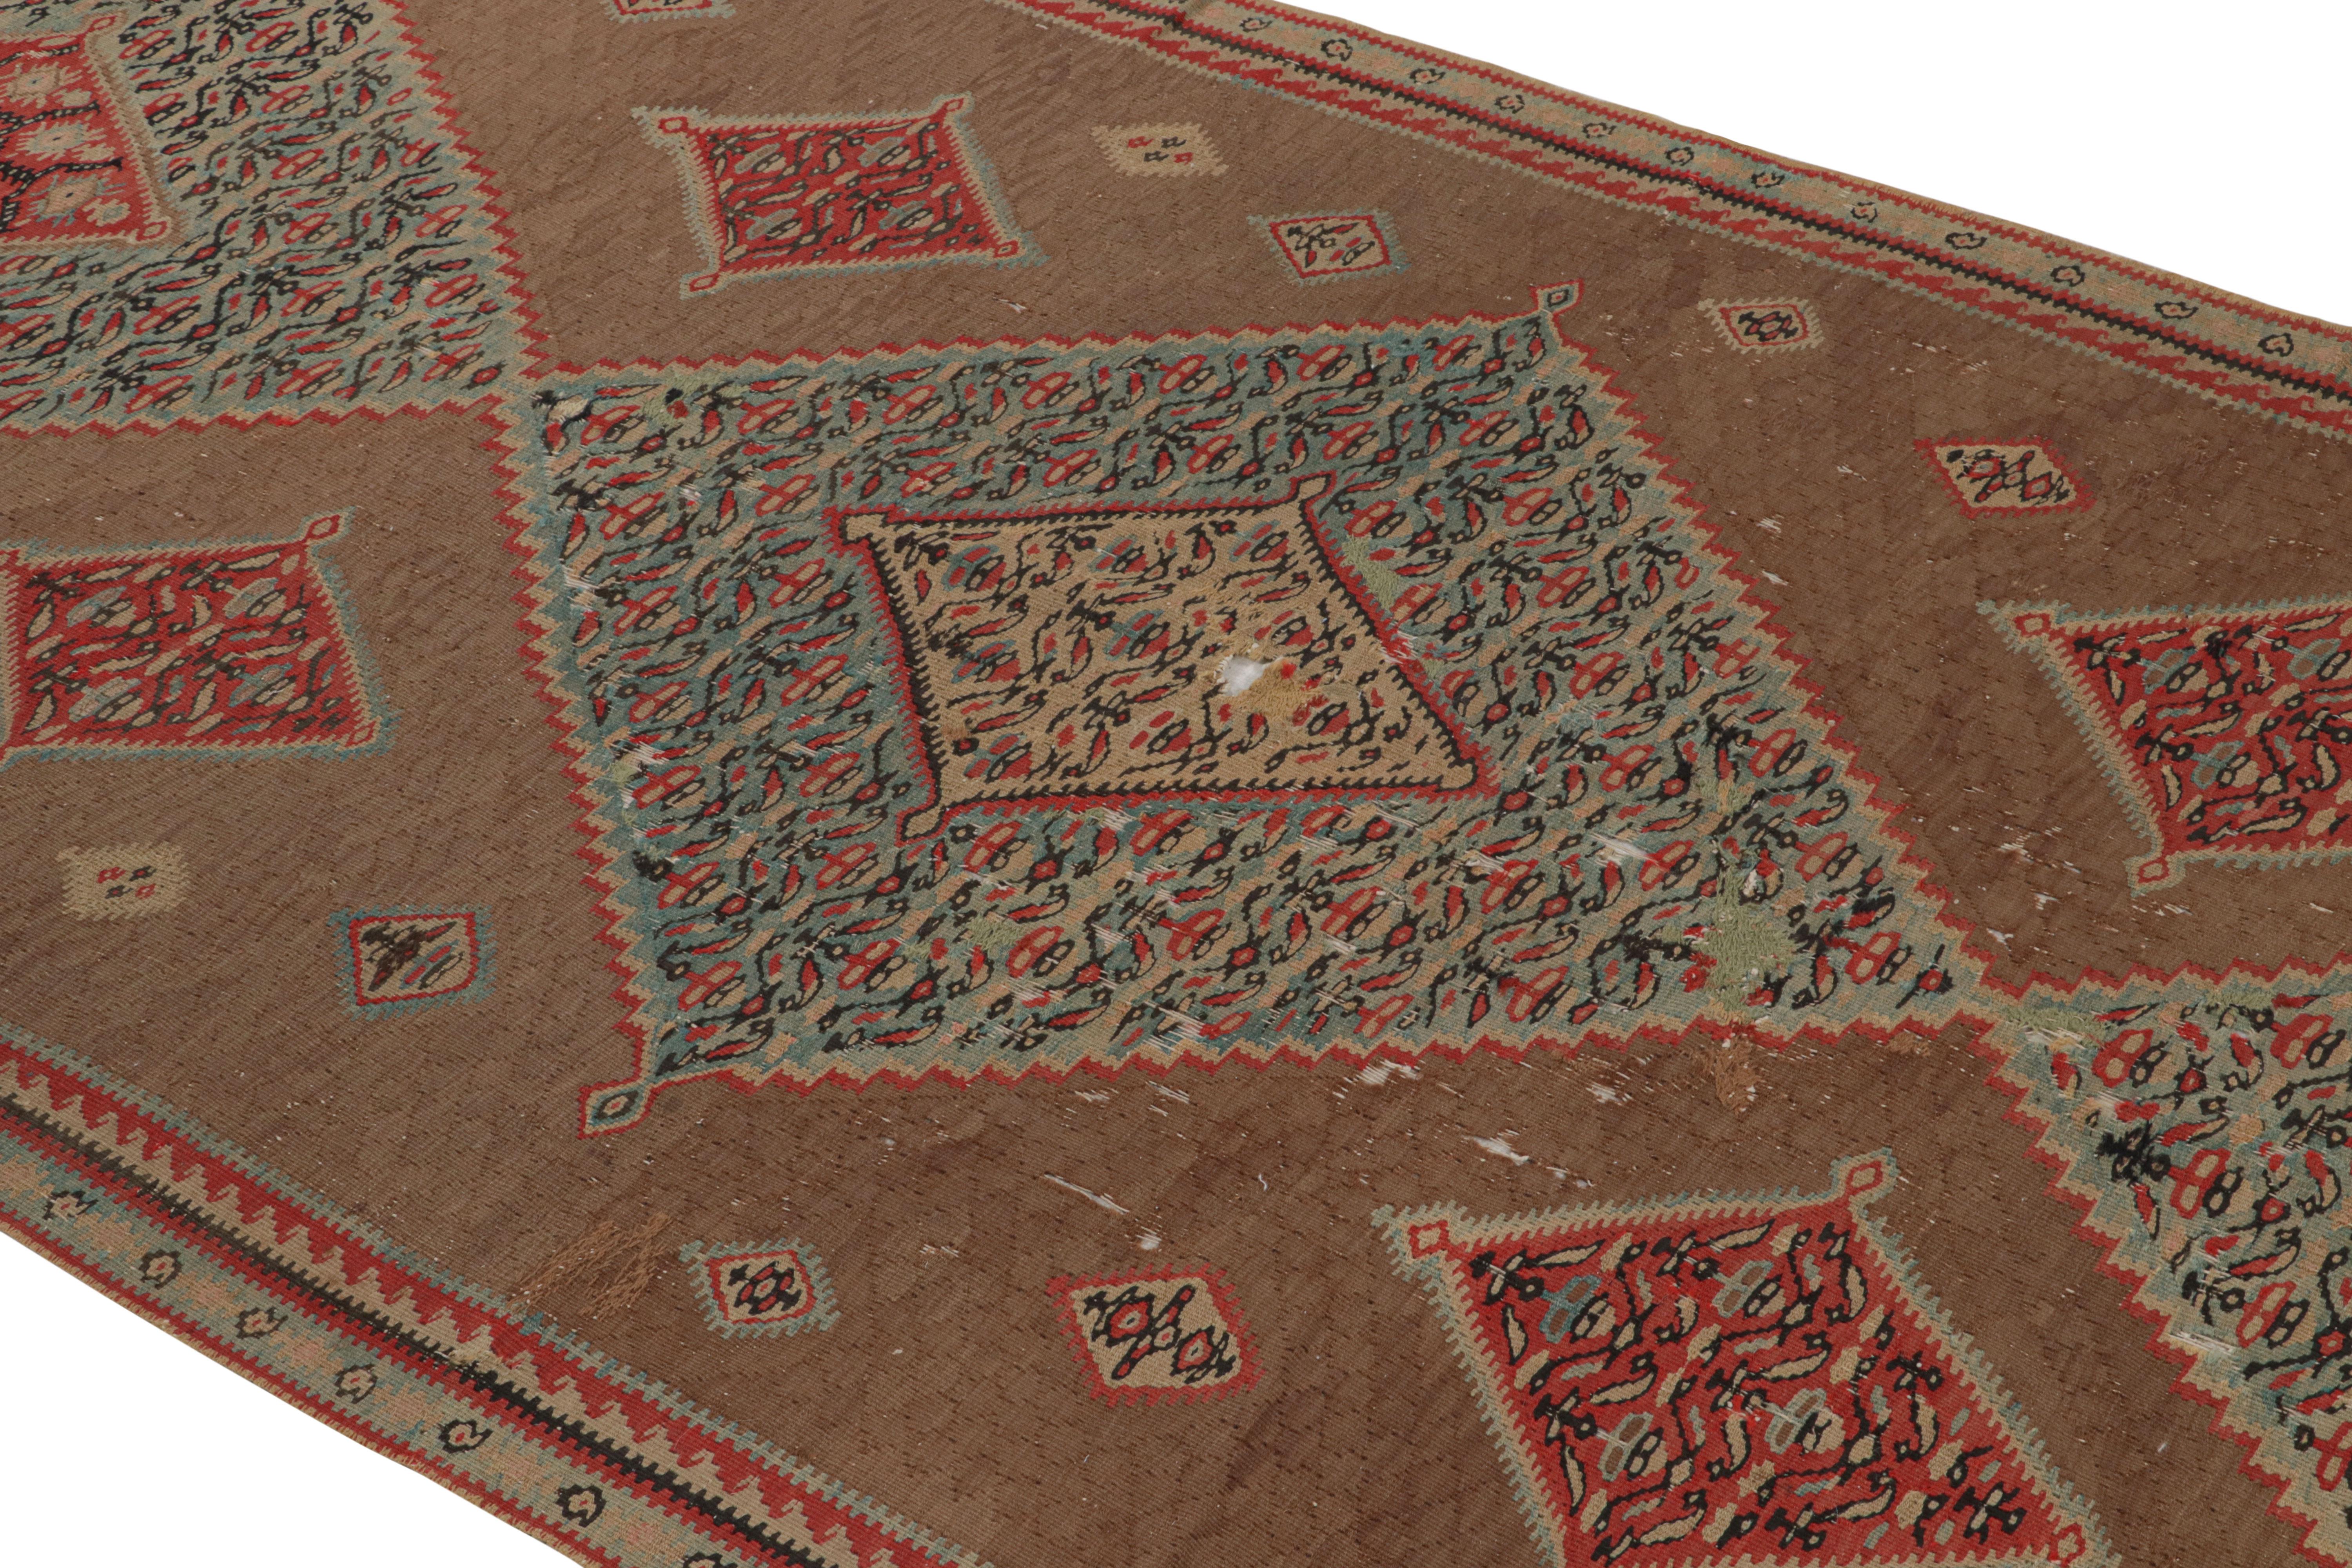 Flat-woven in high quality wool from Persia in 1880, this antique Persian Kilim Senneh runner enjoys a bold geometric series of aqua blue and red outlined diamond medallions, mirrored against a luminous brown field background within finely woven